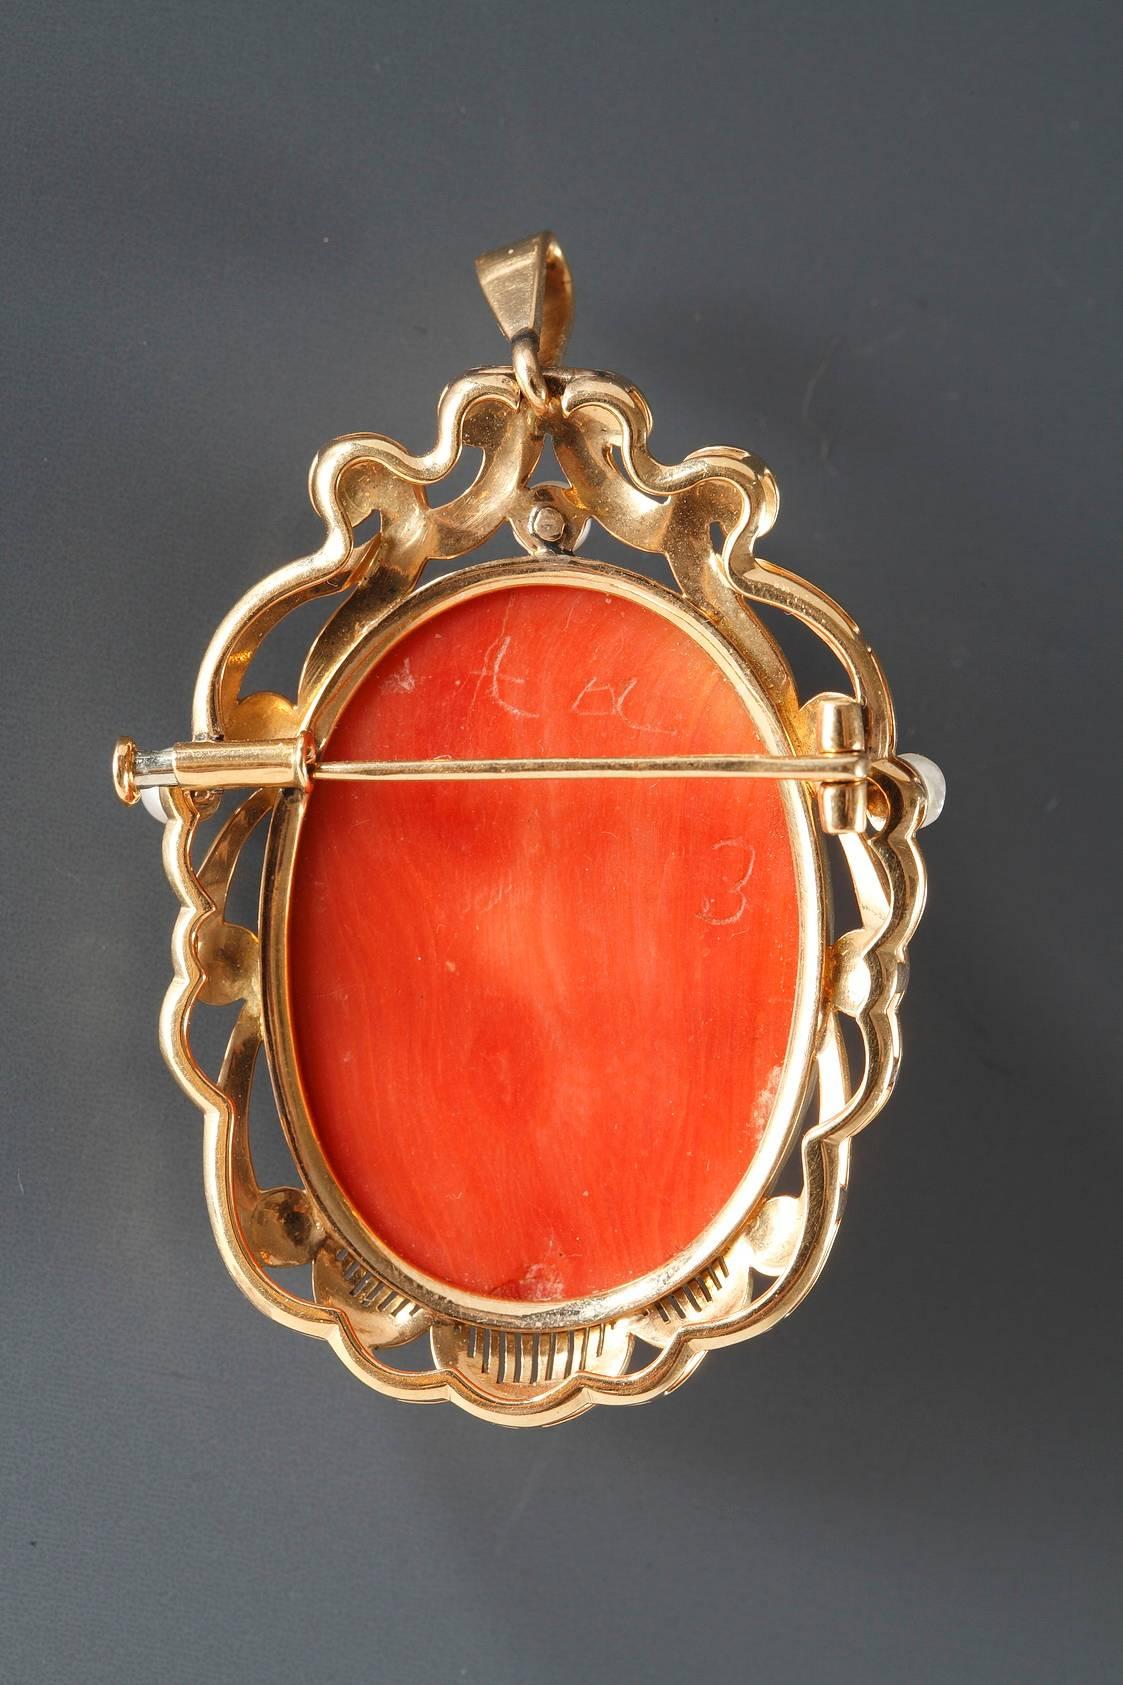 19th century oval, brooch pendant decorated with a coral cameo depicting a young woman in Renaissance taste. The mounting features gold, openwork designs and is set with three pearls. This piece of jewelry can be worn as a brooch or as a